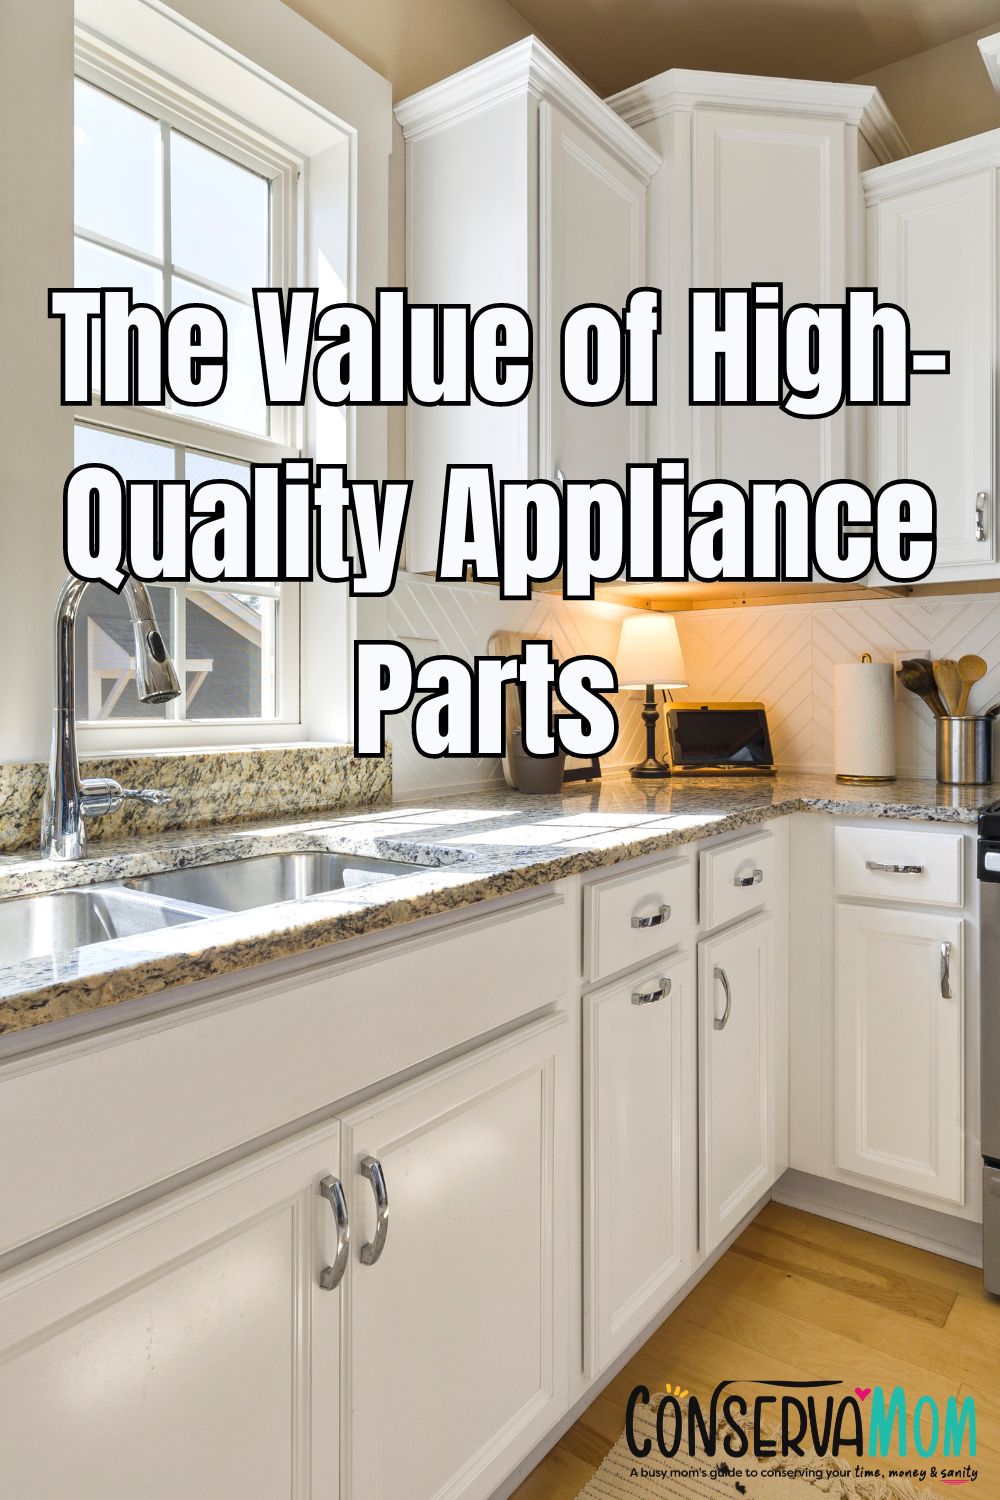 The Value of High-Quality Appliance Parts 